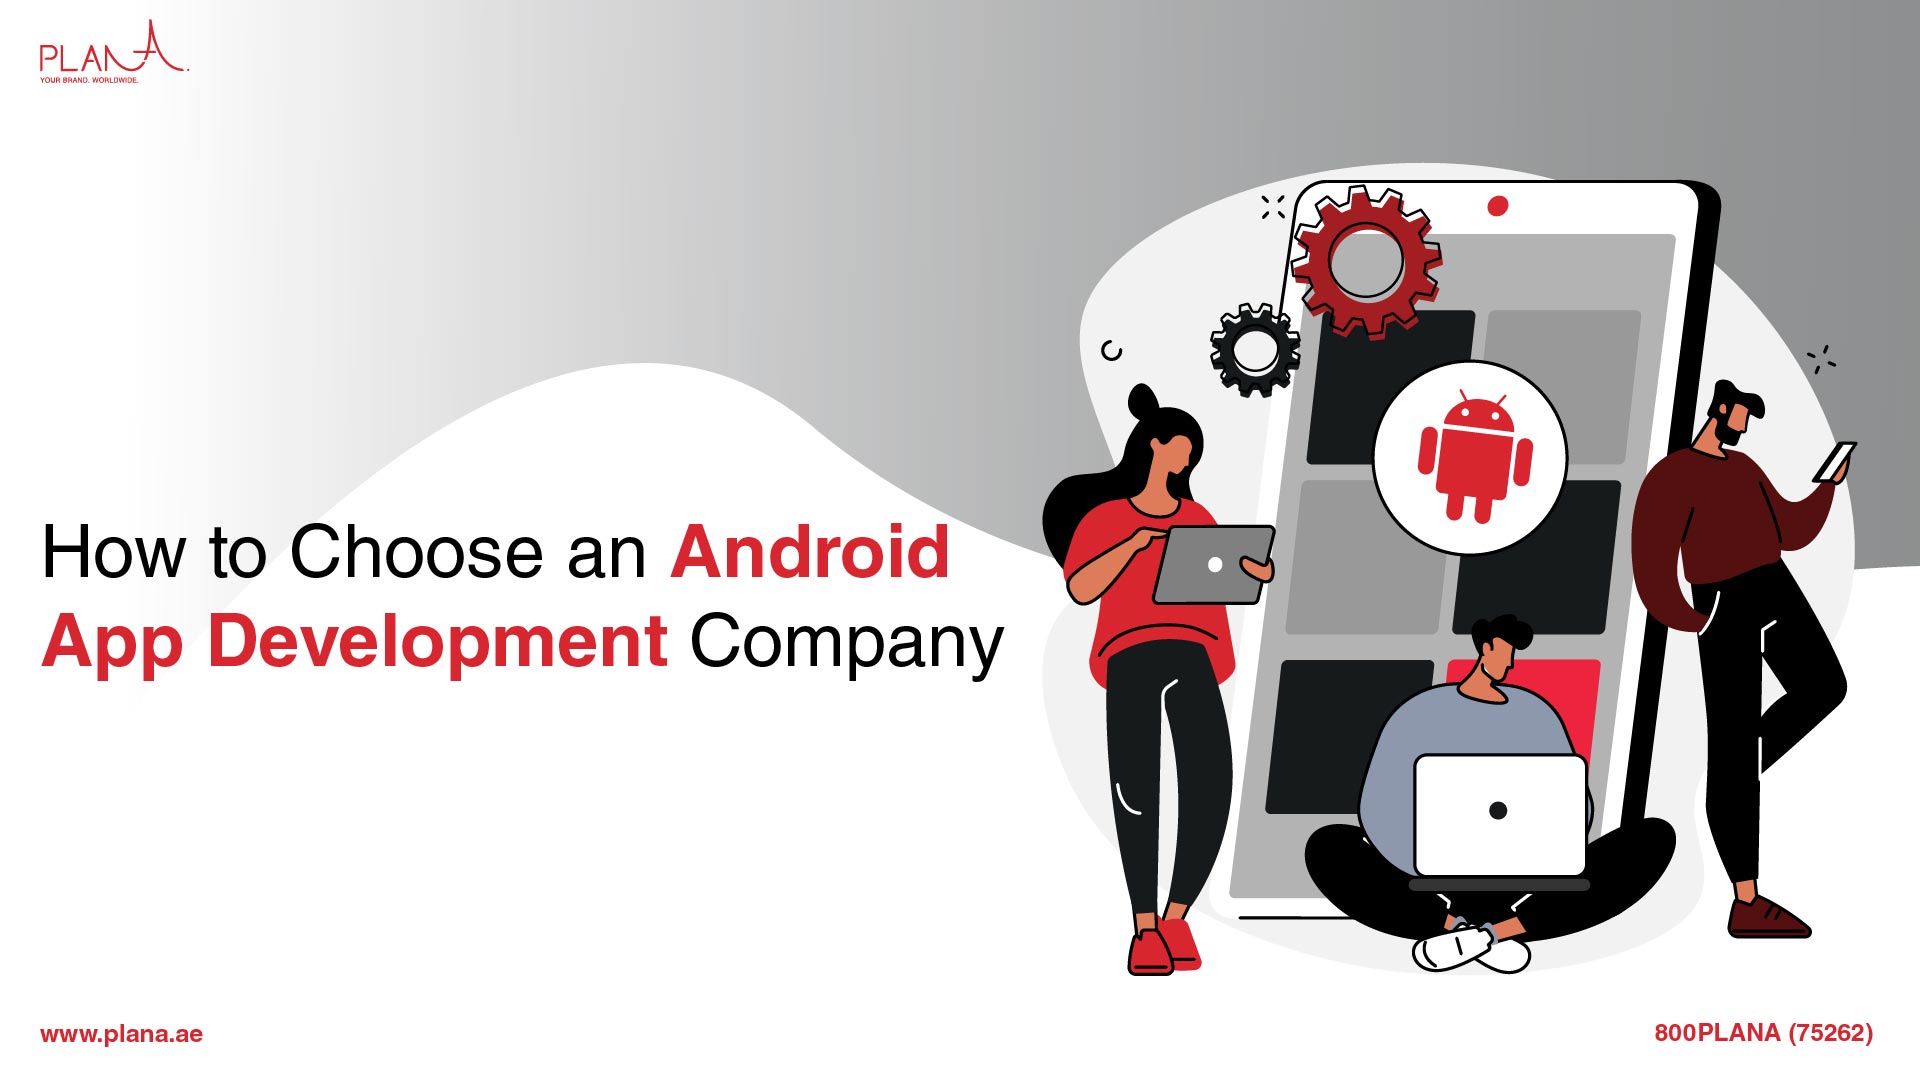 How to Choose an Android App Development Company